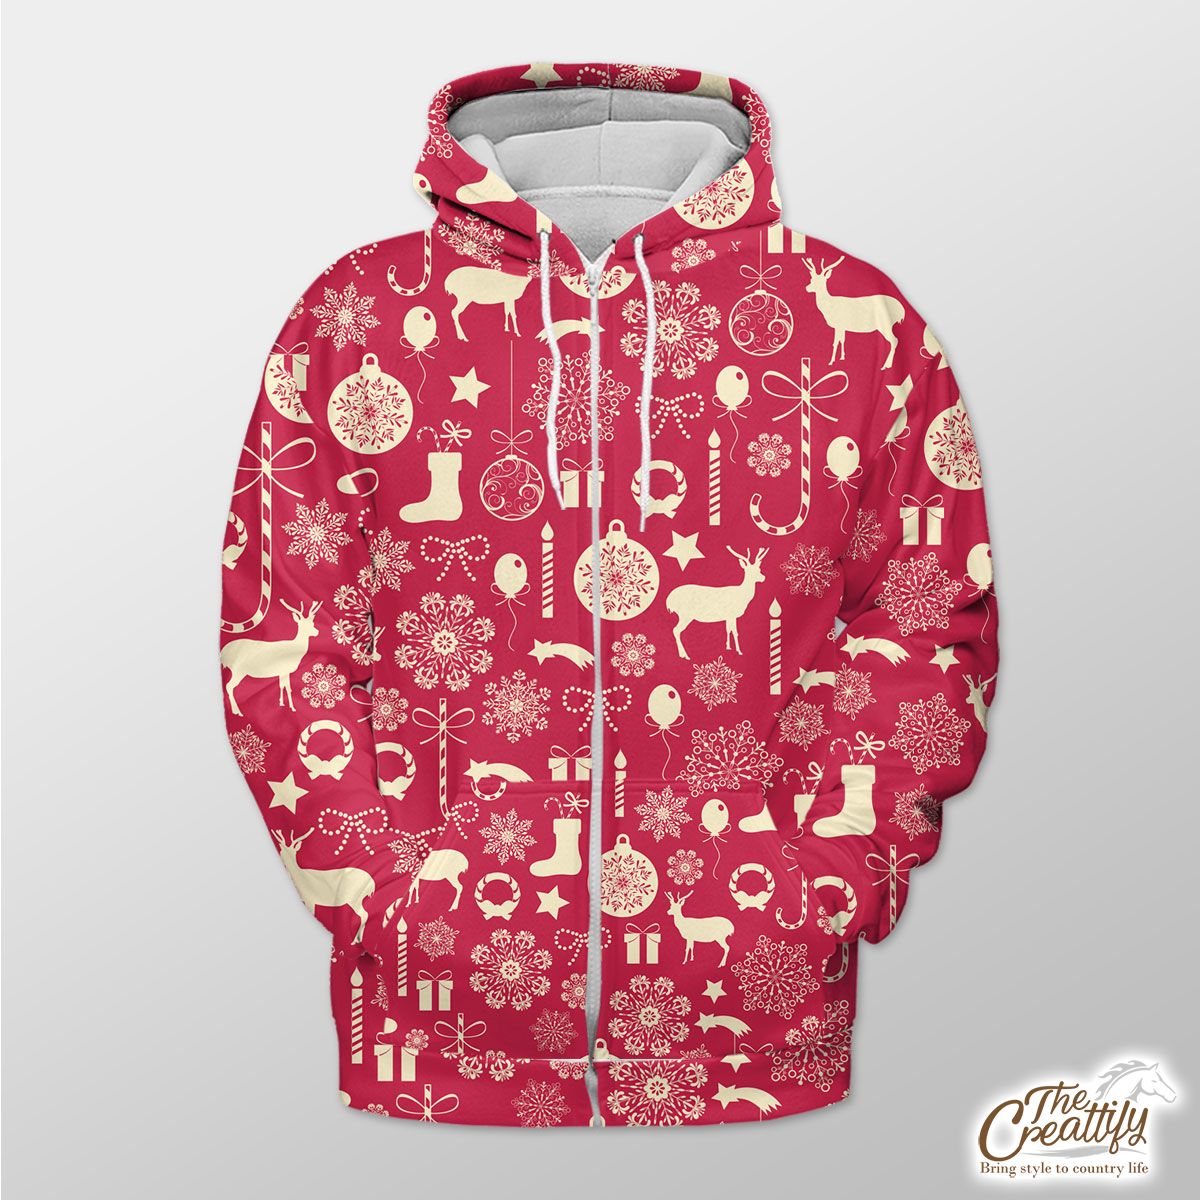 Happy Christmas With Reindeer, Christmas Balls, Socks, Candy Canes On Snowflake Background Zip Hoodie